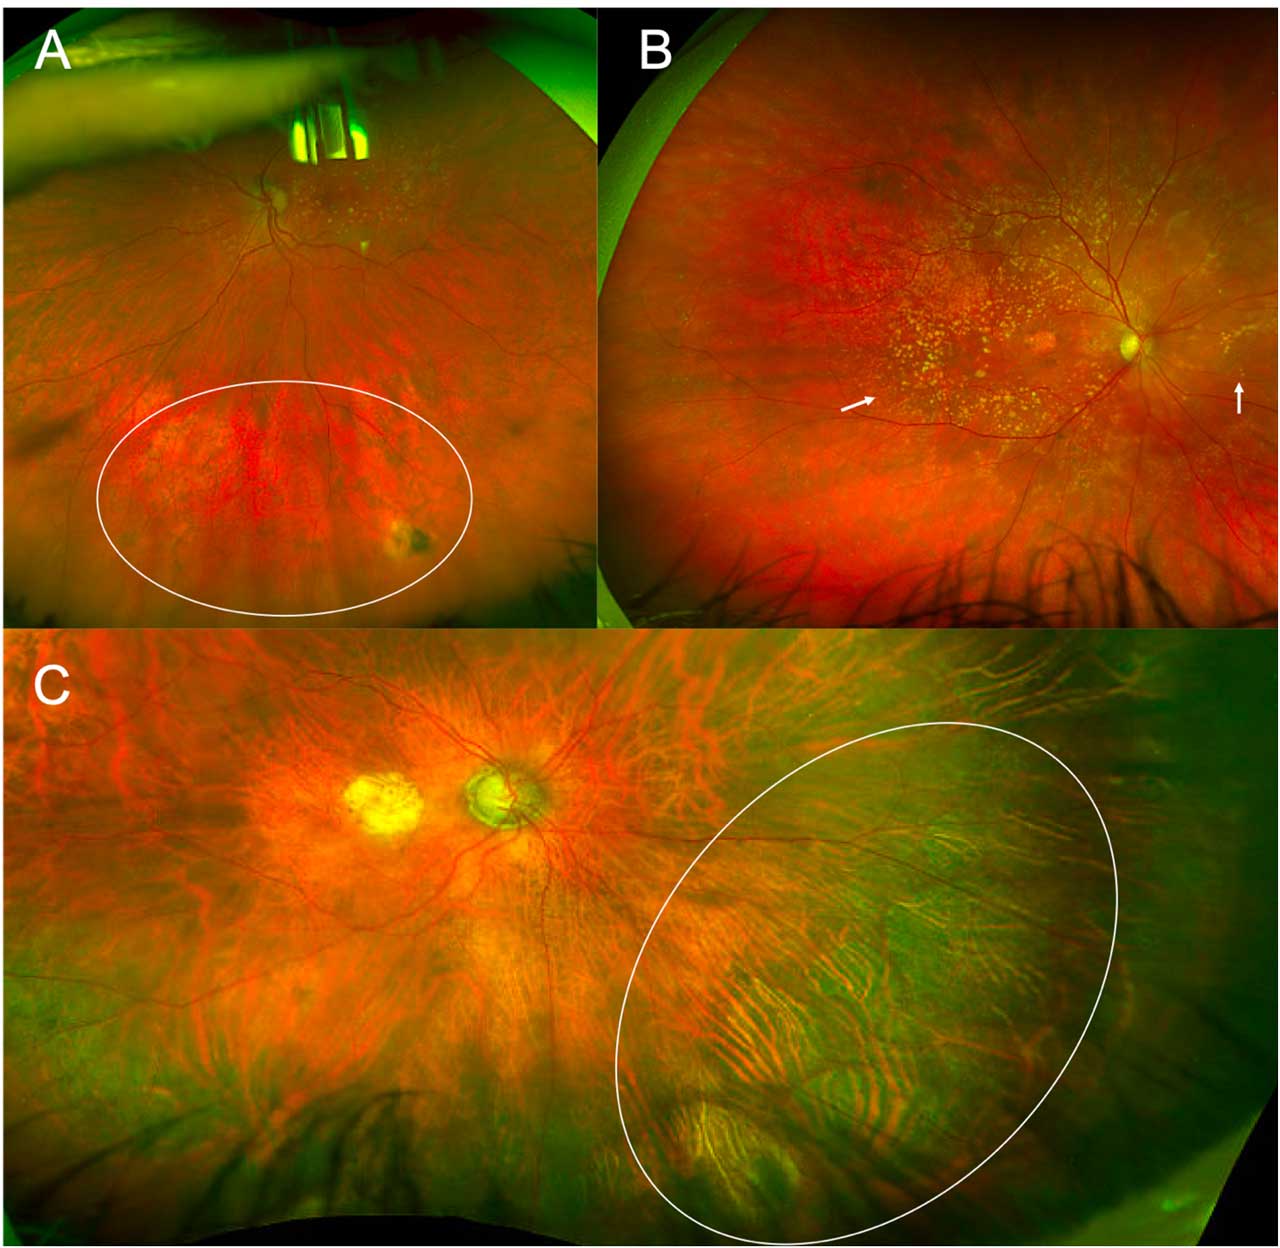 Figure 2. Peripheral retinal changes in AMD, including reticular pigmentary changes (A; white circle), midperipheral drusen (B; examples highlighted with arrows), and atrophy (C; white circle).